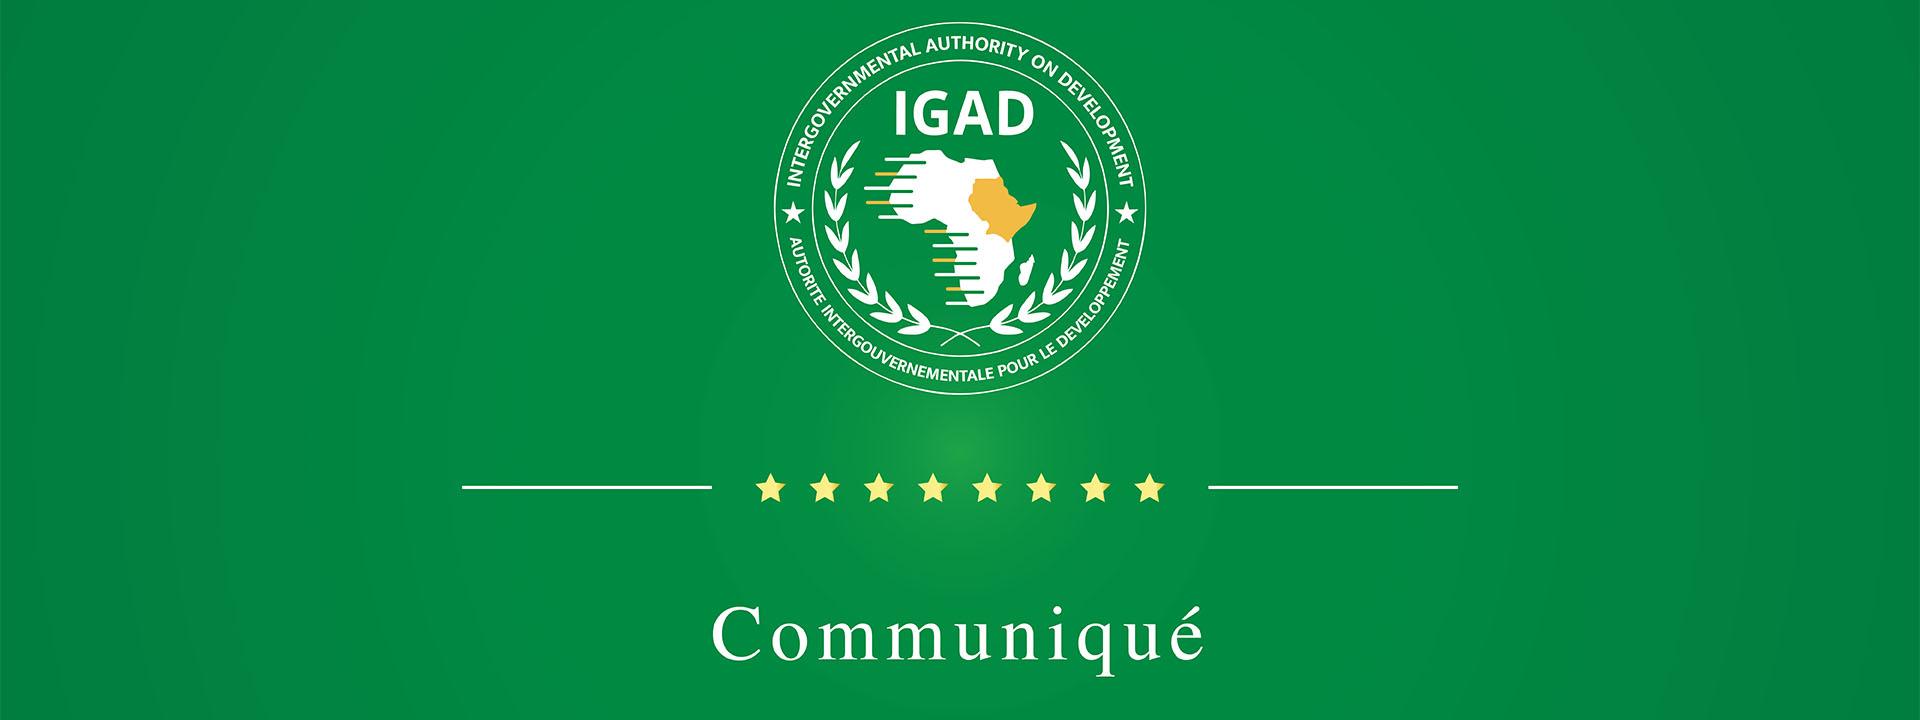 Communiqué of the 1st Meeting of the IGAD Quartet Group of Countries for the Resolution of the Situation in the Republic of Sudan